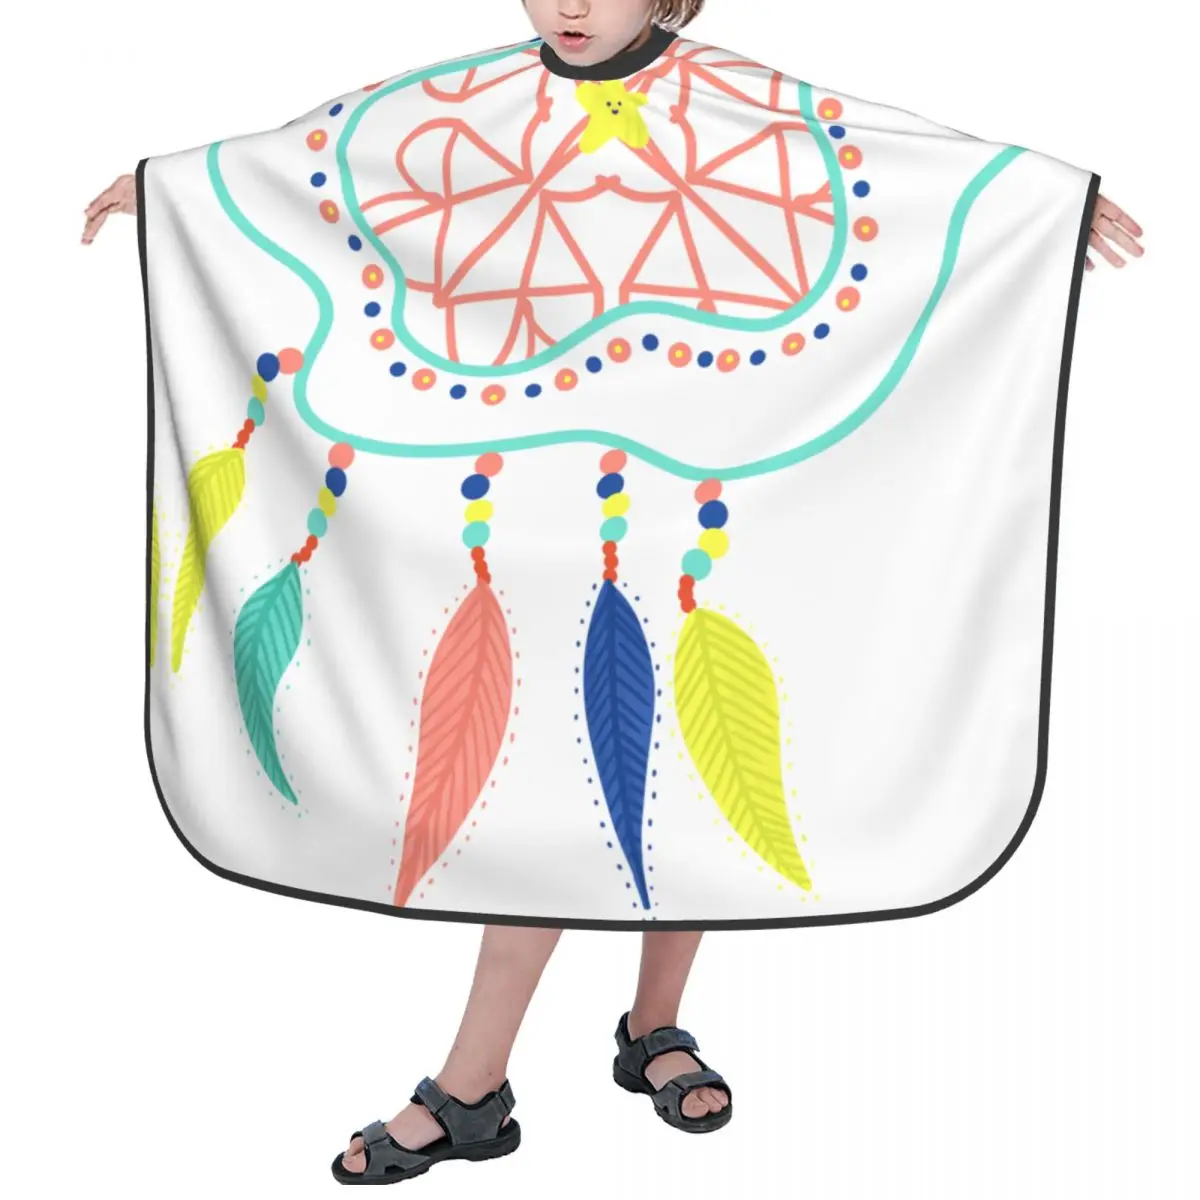 

Kids Barber Cape Hair Cutting Hairdressing Salon Styling Cloth Apron Cover Gown for Children Boys Girls Dreamcatcher